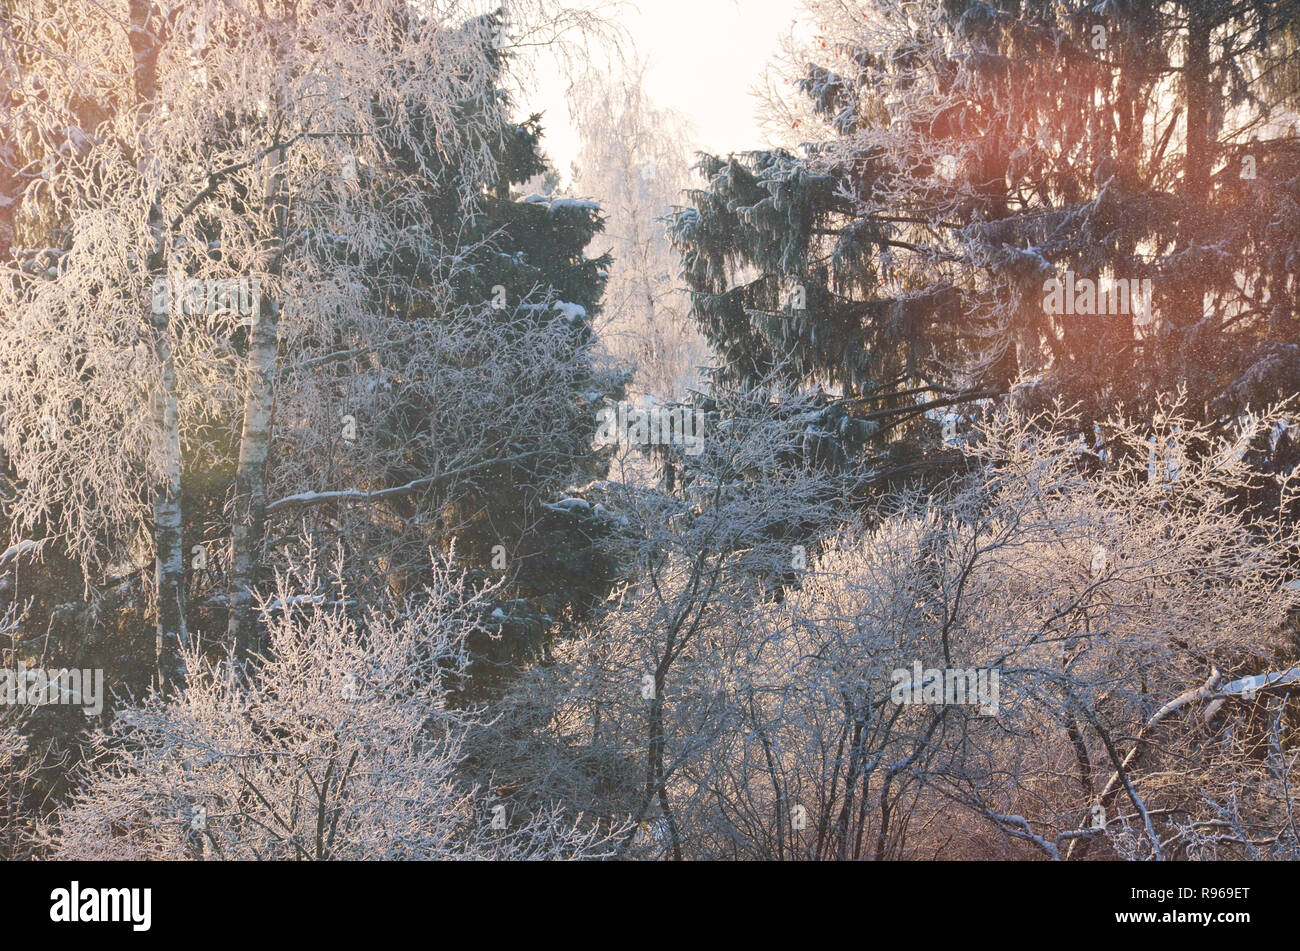 Stock image. Branches of trees and bushes in rime ice. Winter sunny forest landscape. Stock Photo